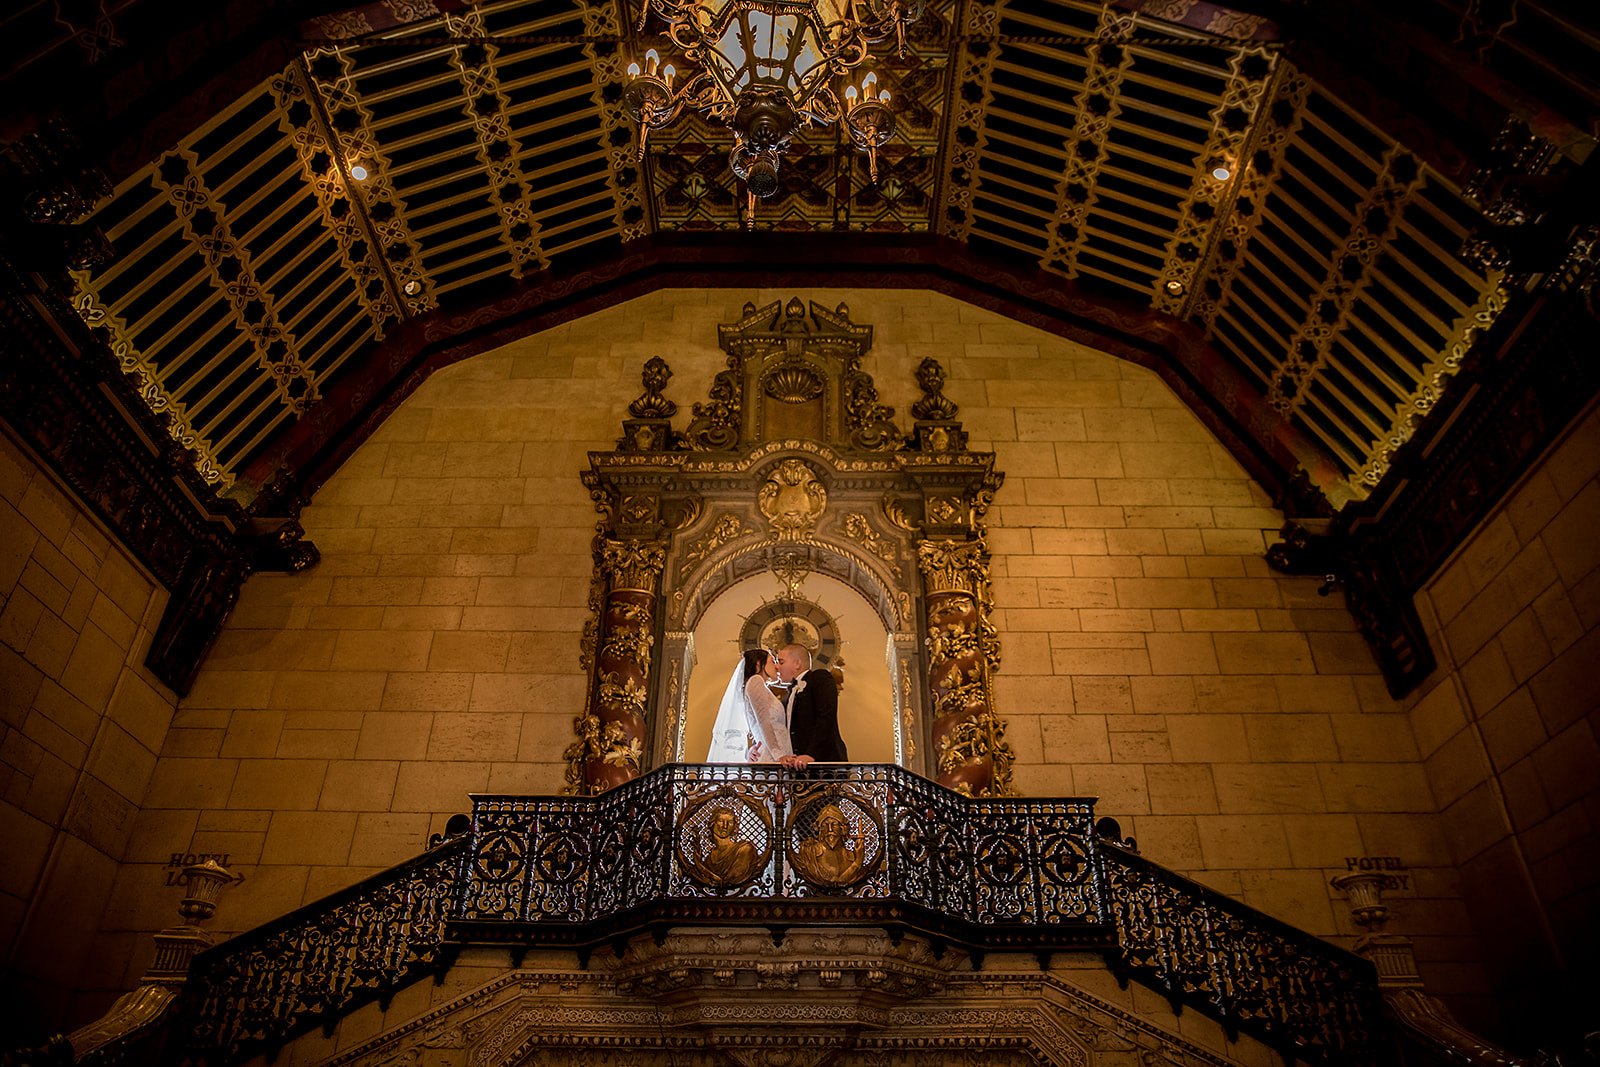 A bride and groom posing for a wedding photographer on the stairs of an ornate building in Los Angeles.